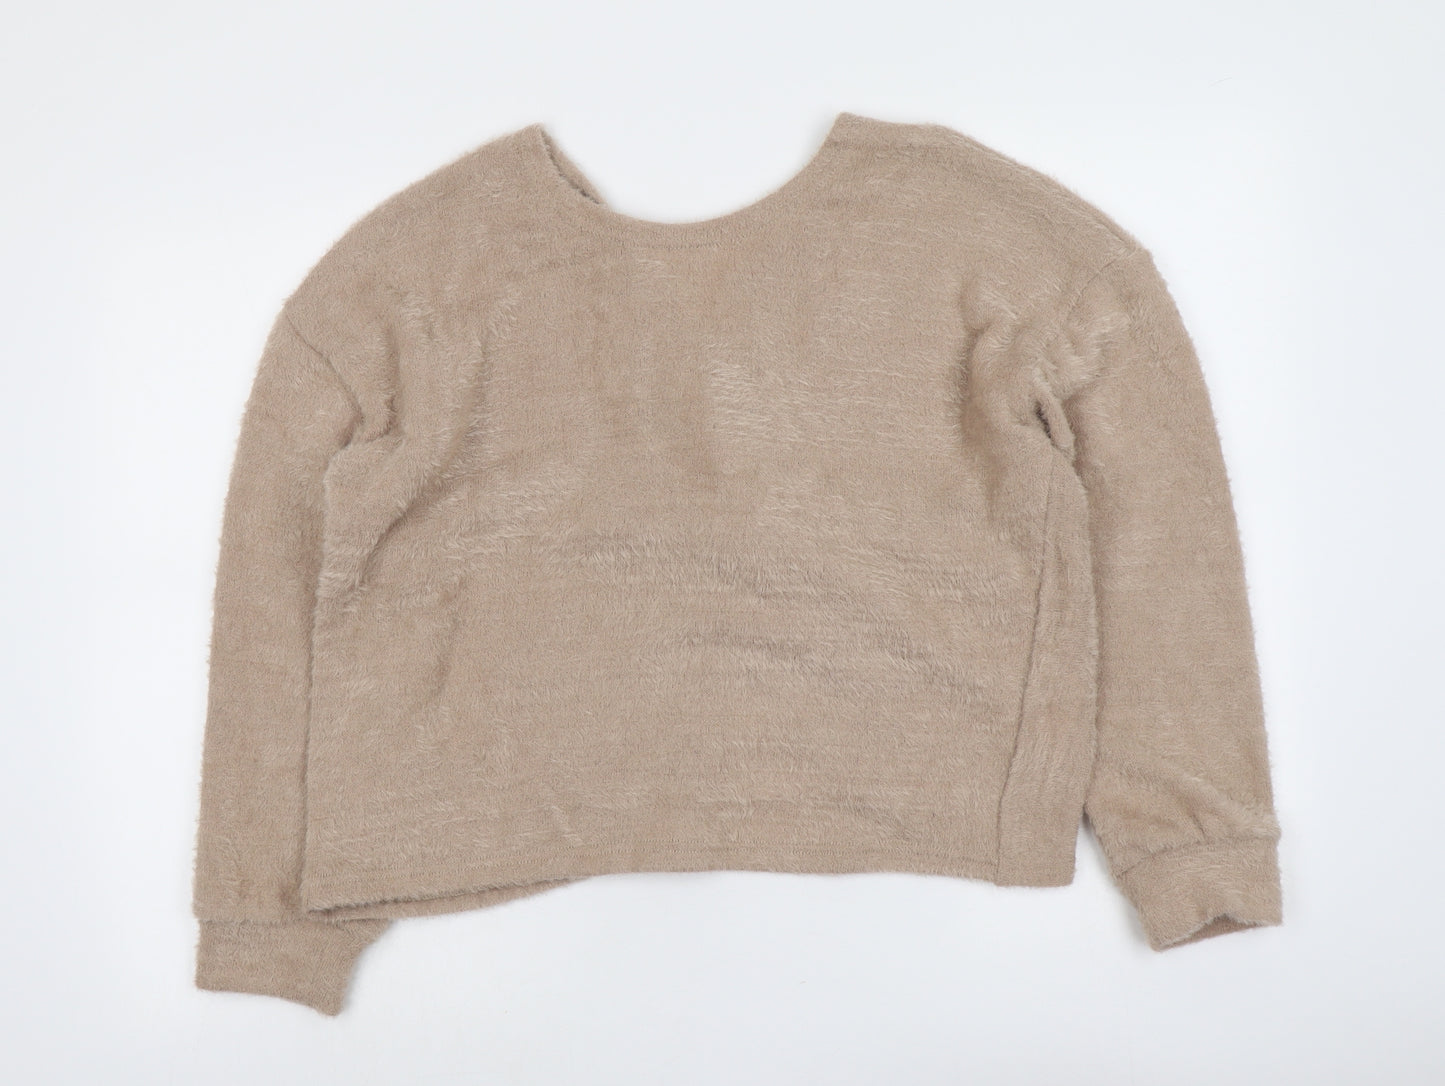 New Look Womens Beige V-Neck Polyester Pullover Jumper Size L - Fluffy Knot Detail